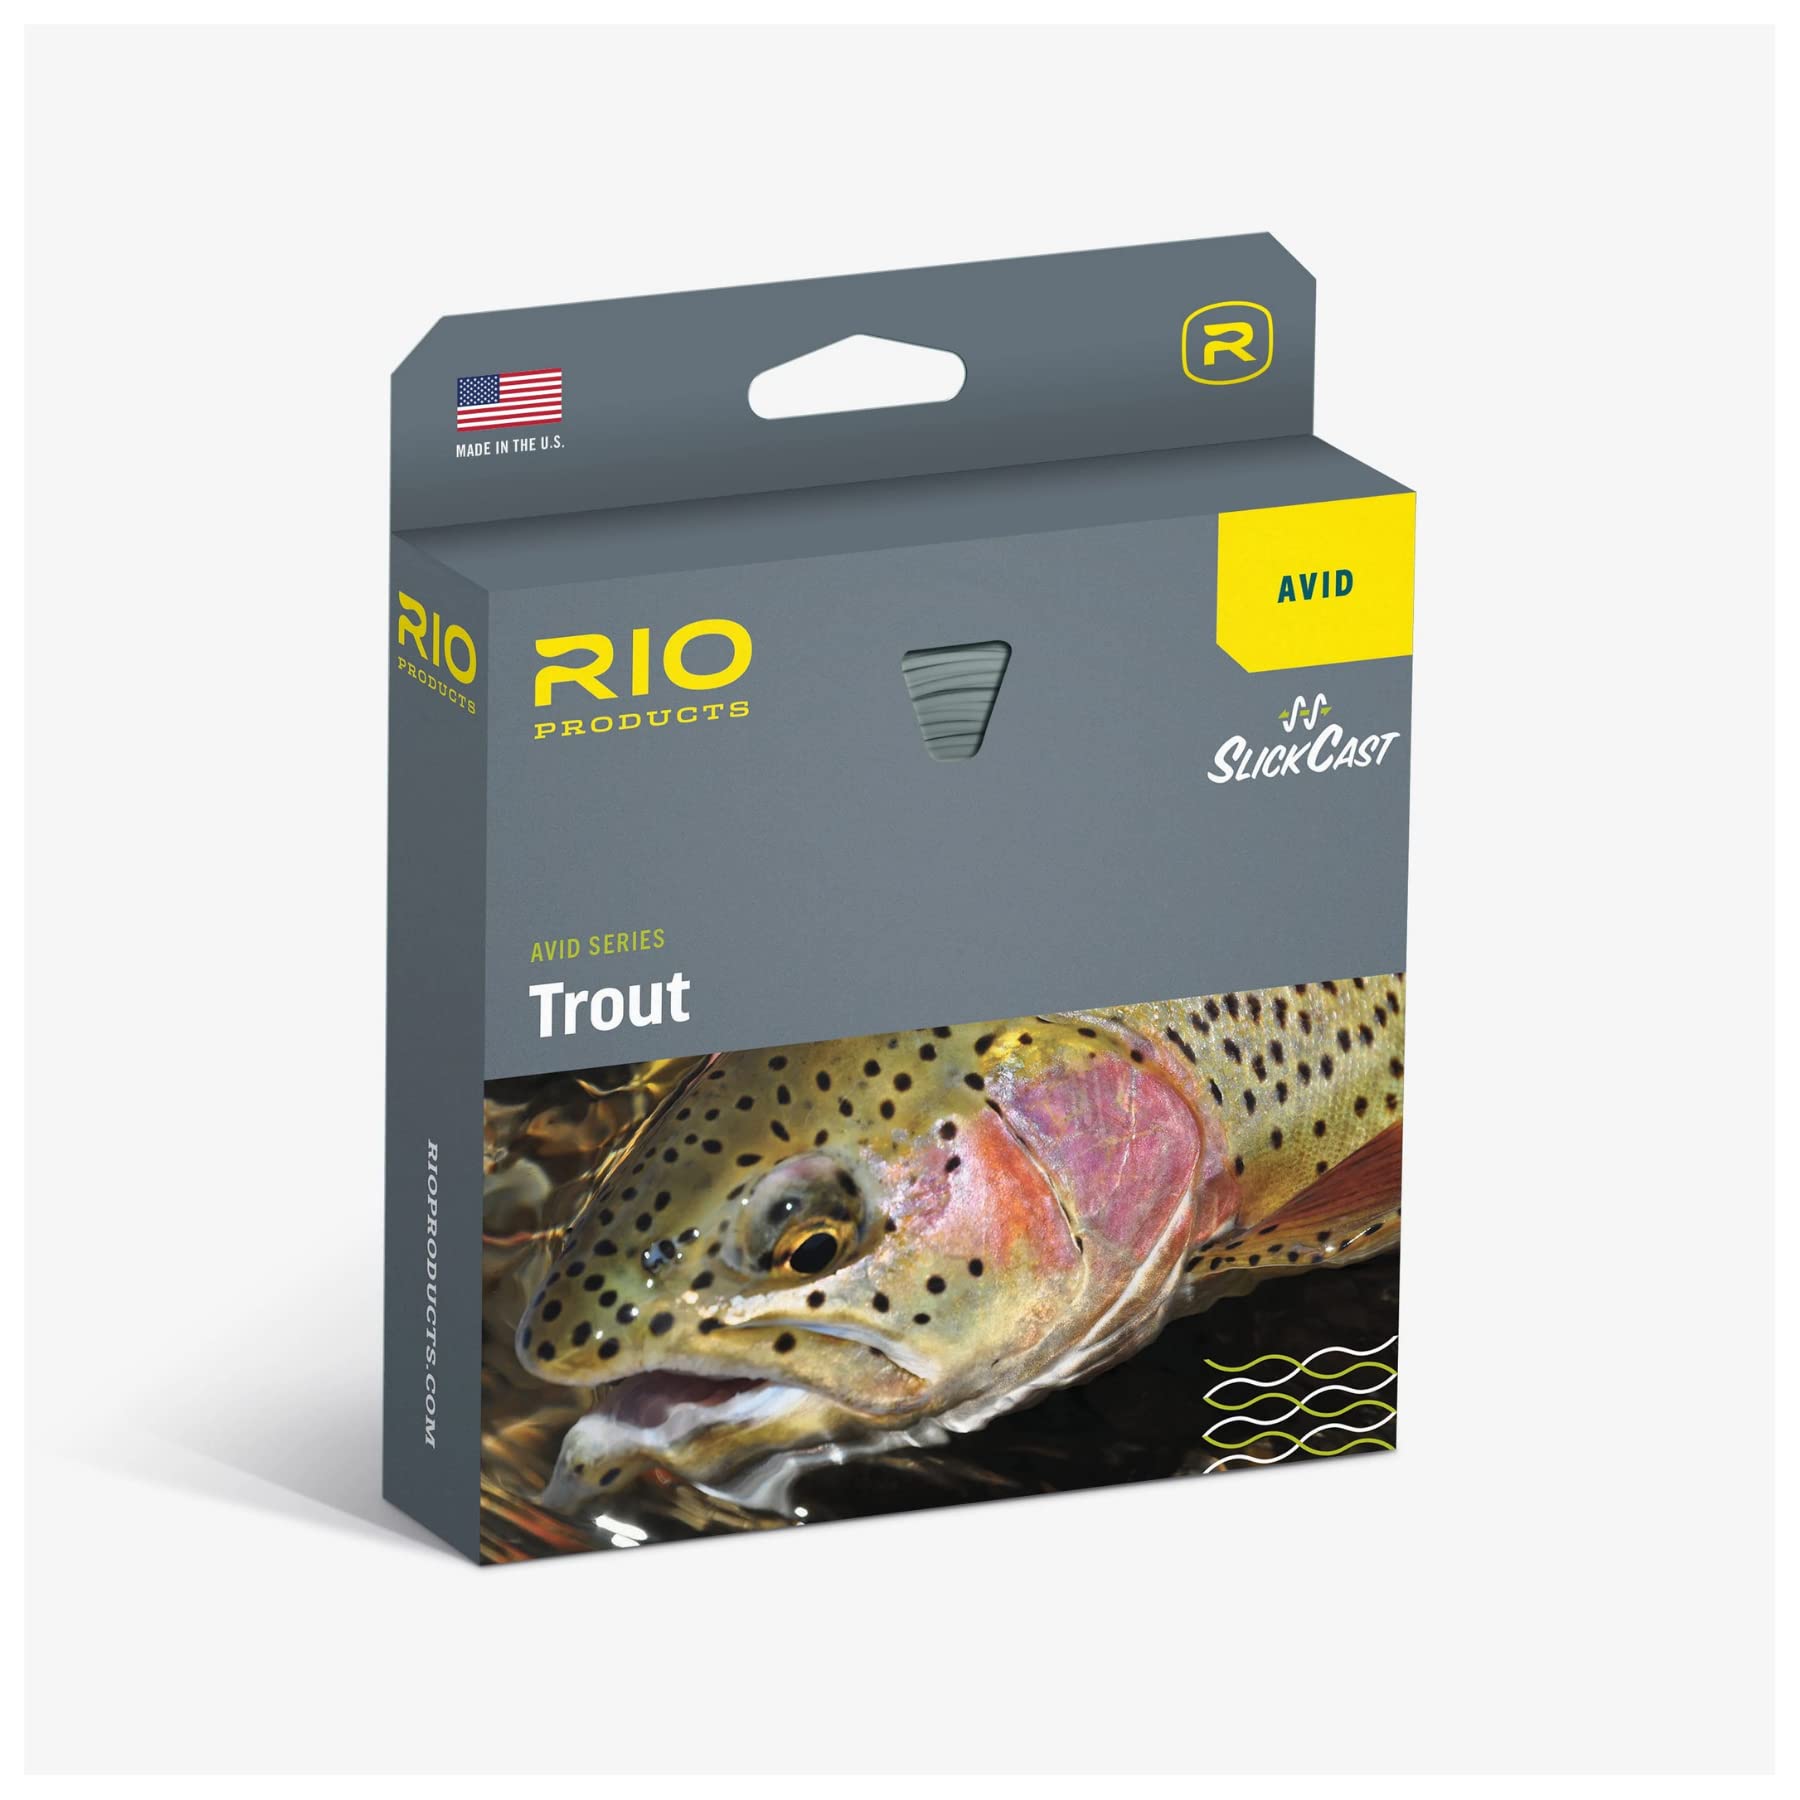 RIO Products Avid Series Trout Fly Line, Slickcast Freshwater Fly Fishing  Line for Trout, Floating WF5F